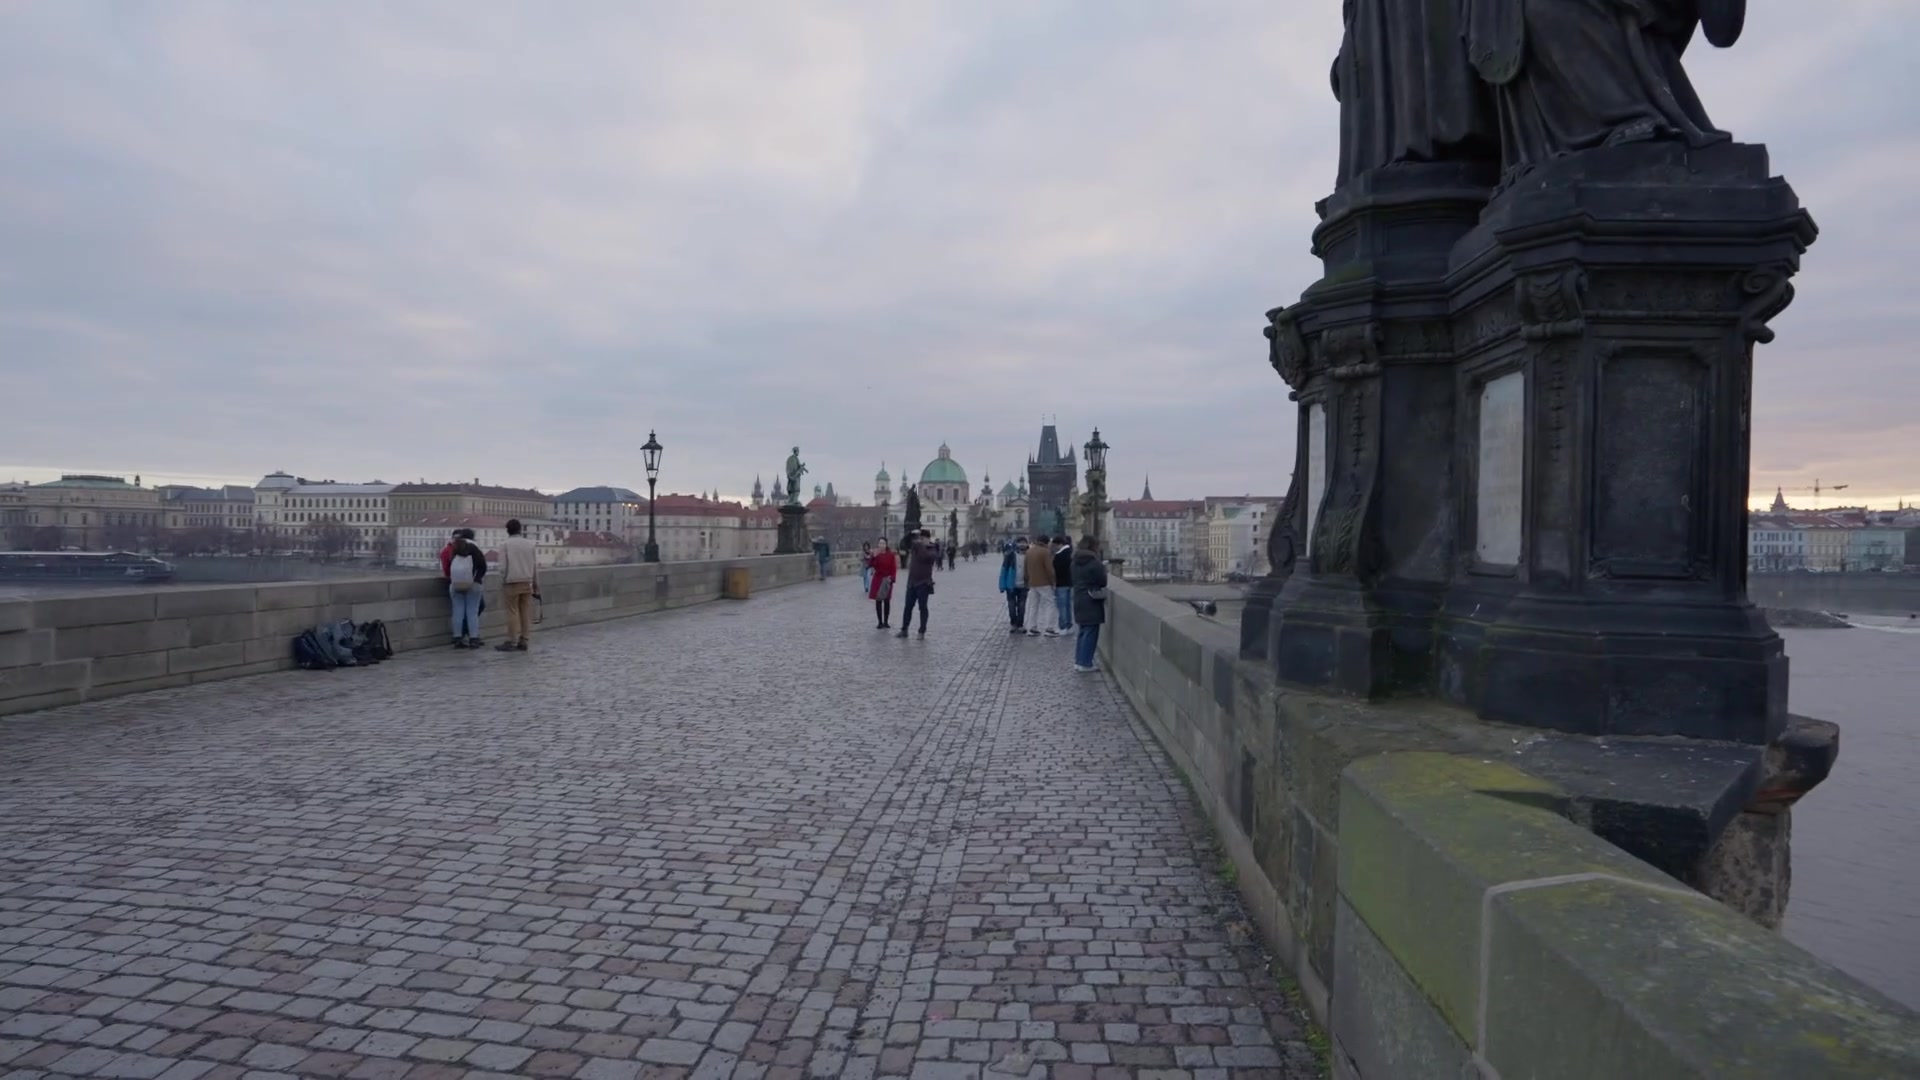 jameswithlola – Embark On a Magical Journey To The City Of Prague, a Majestic Plac